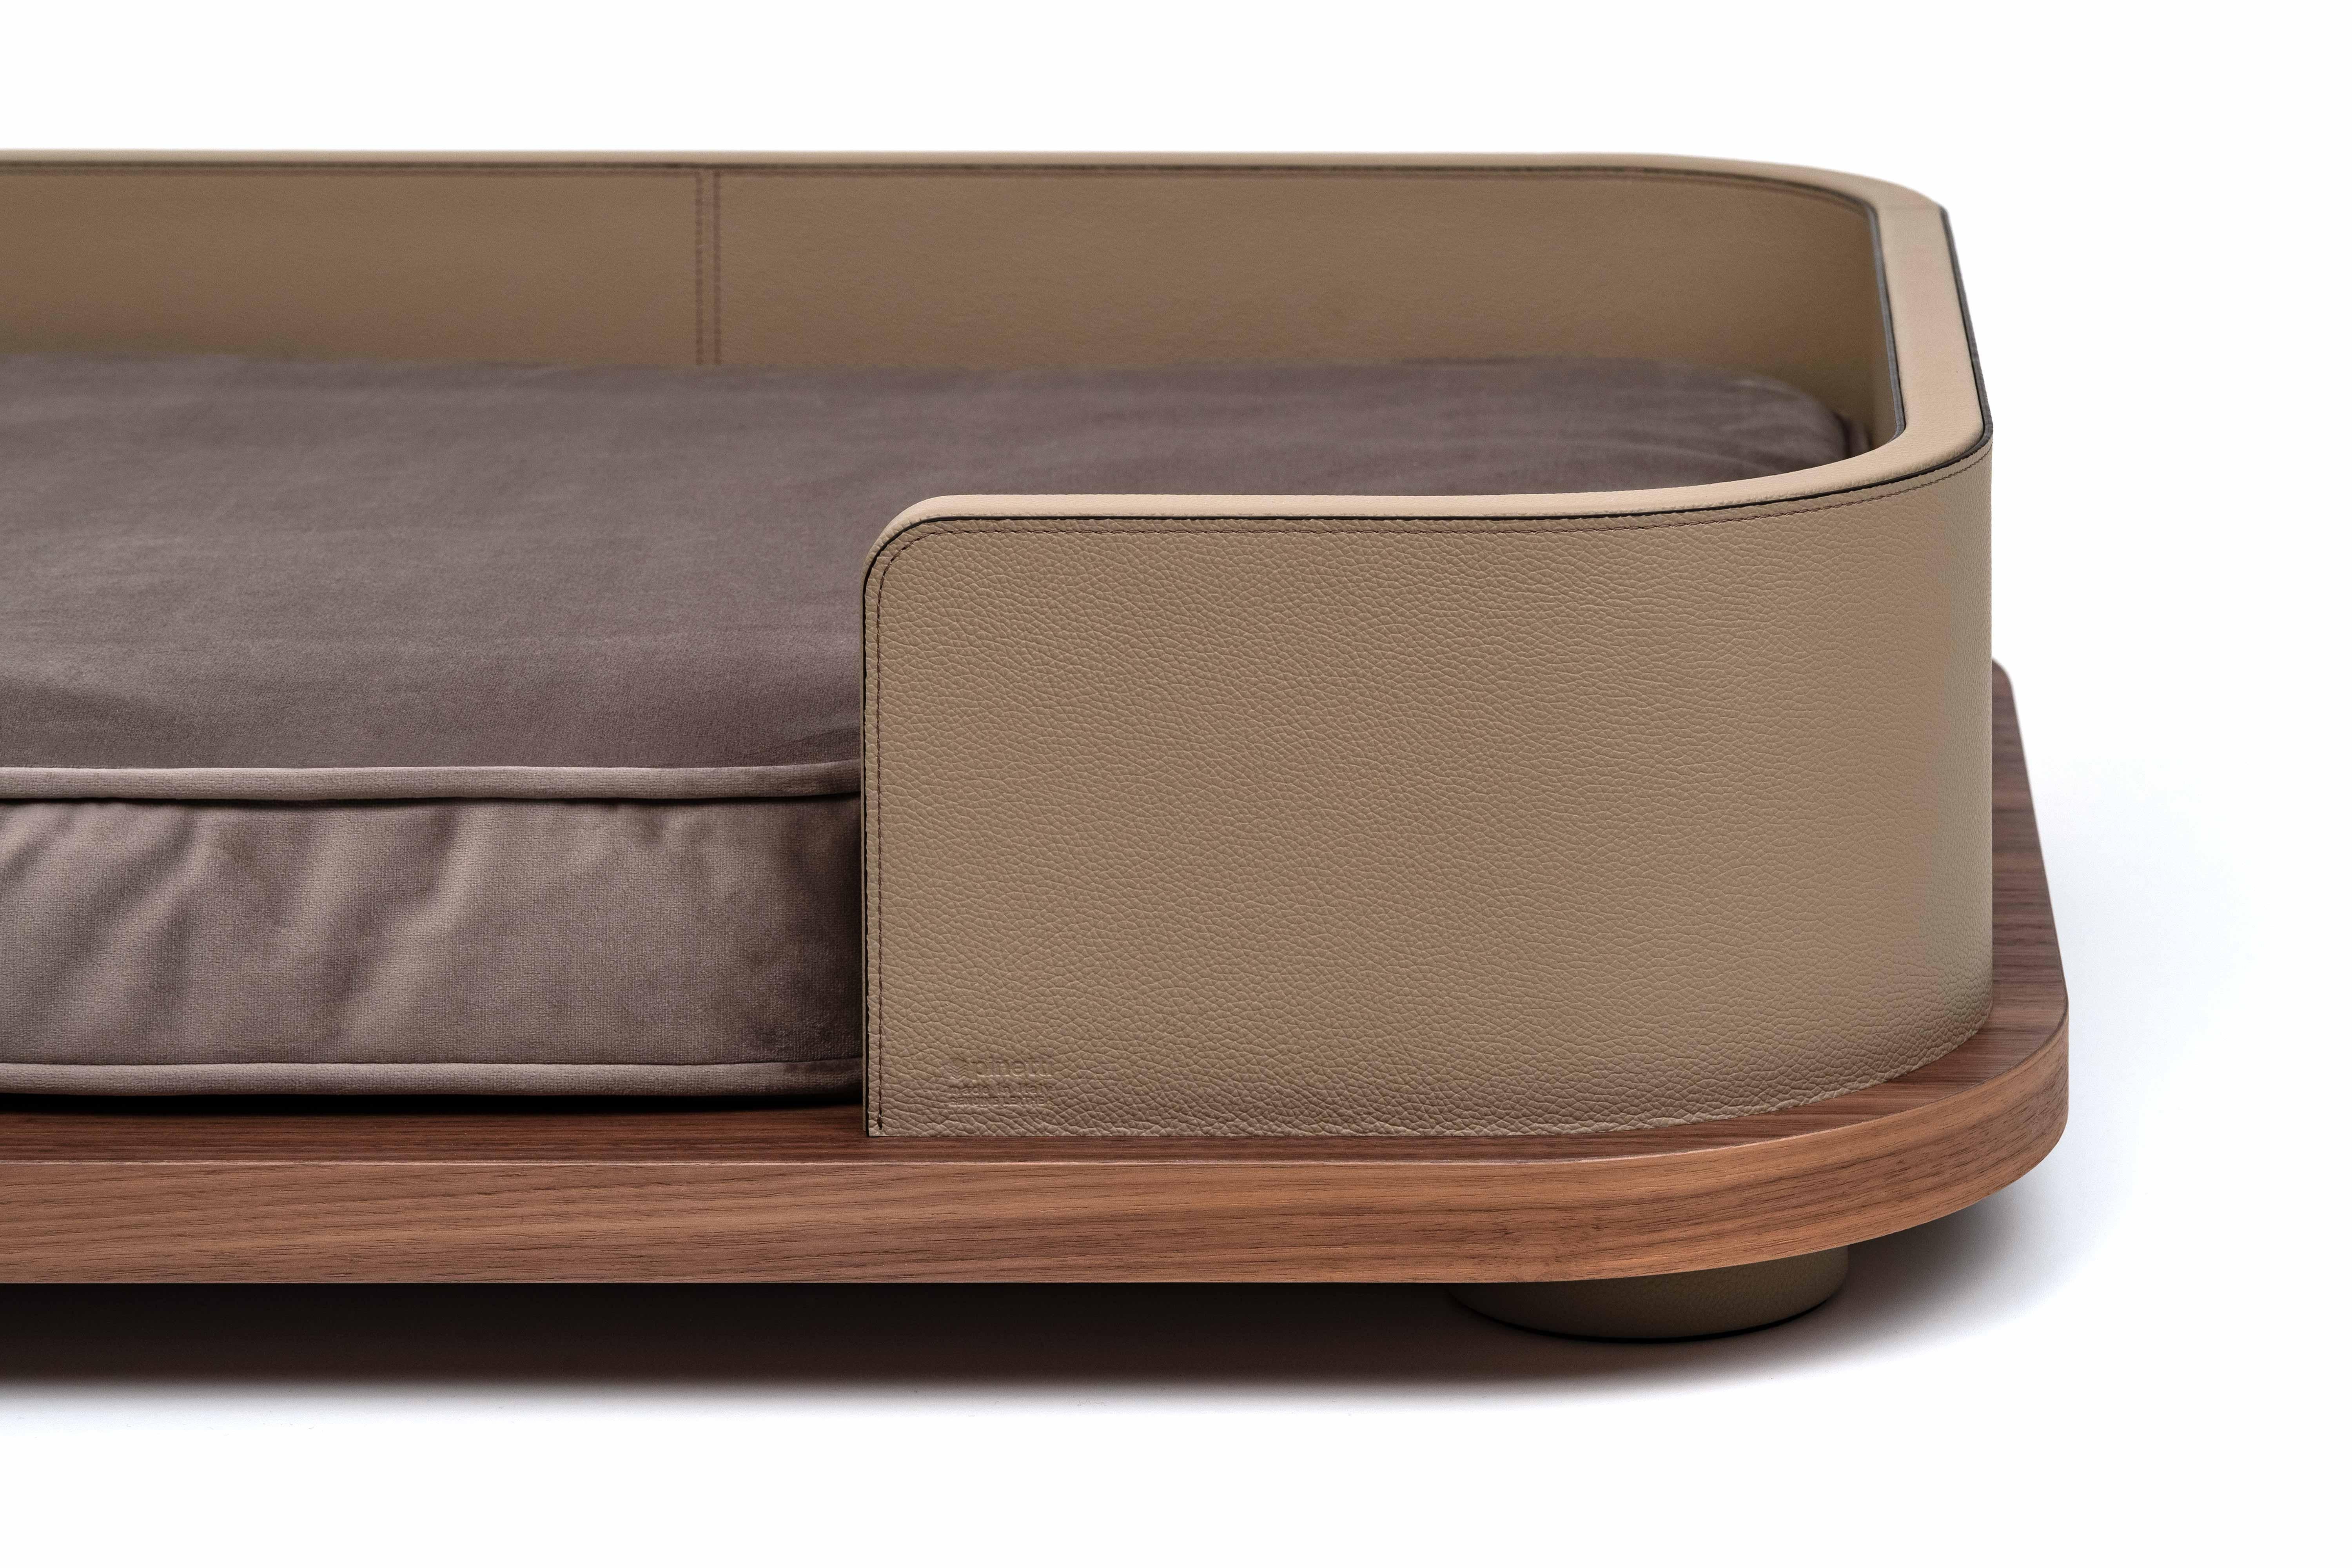 Pamper your furry friends with our new Pet bed.

A wooden structure masterfully handcrafted  covered in leather with precious canaletto walnut wood base and soft memory foam cushion covered in microfiber easily removable and washable. A new line